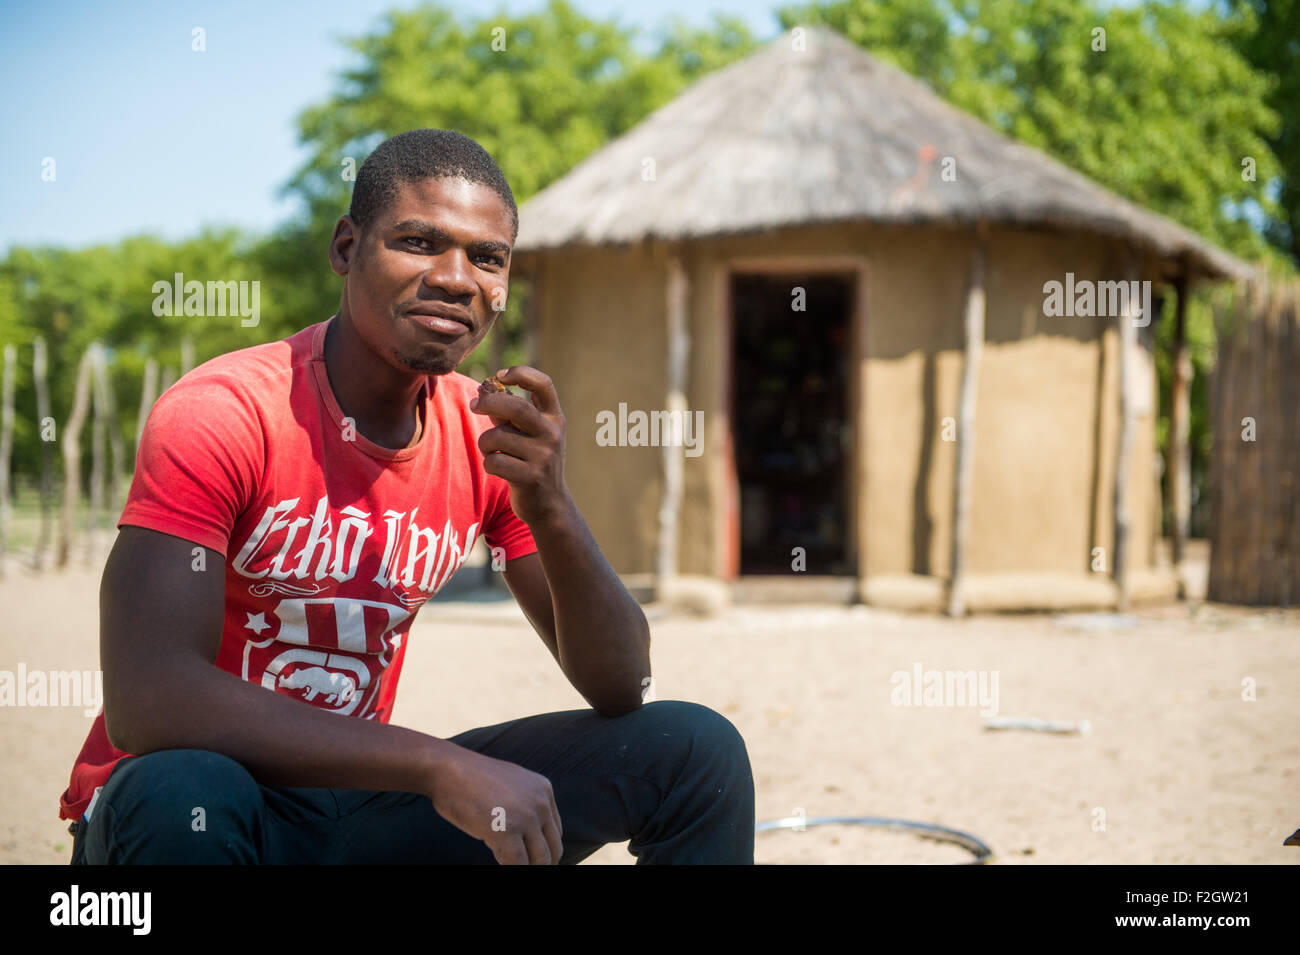 African man sitting in front of thatched roof hut in Botswana, Africa Stock Photo